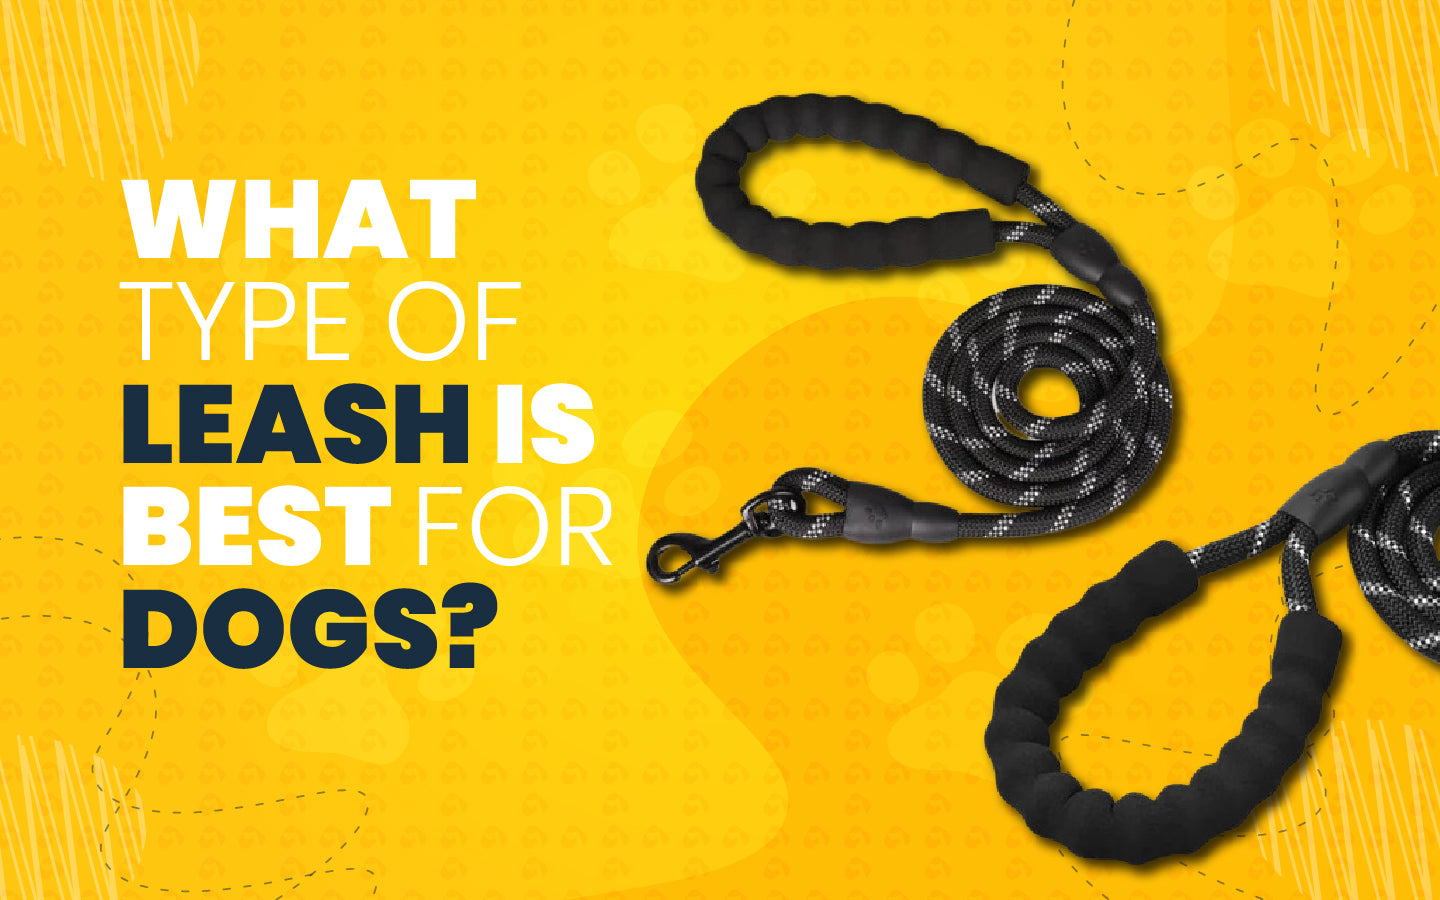 What Type Of leash Is Best For Dogs?